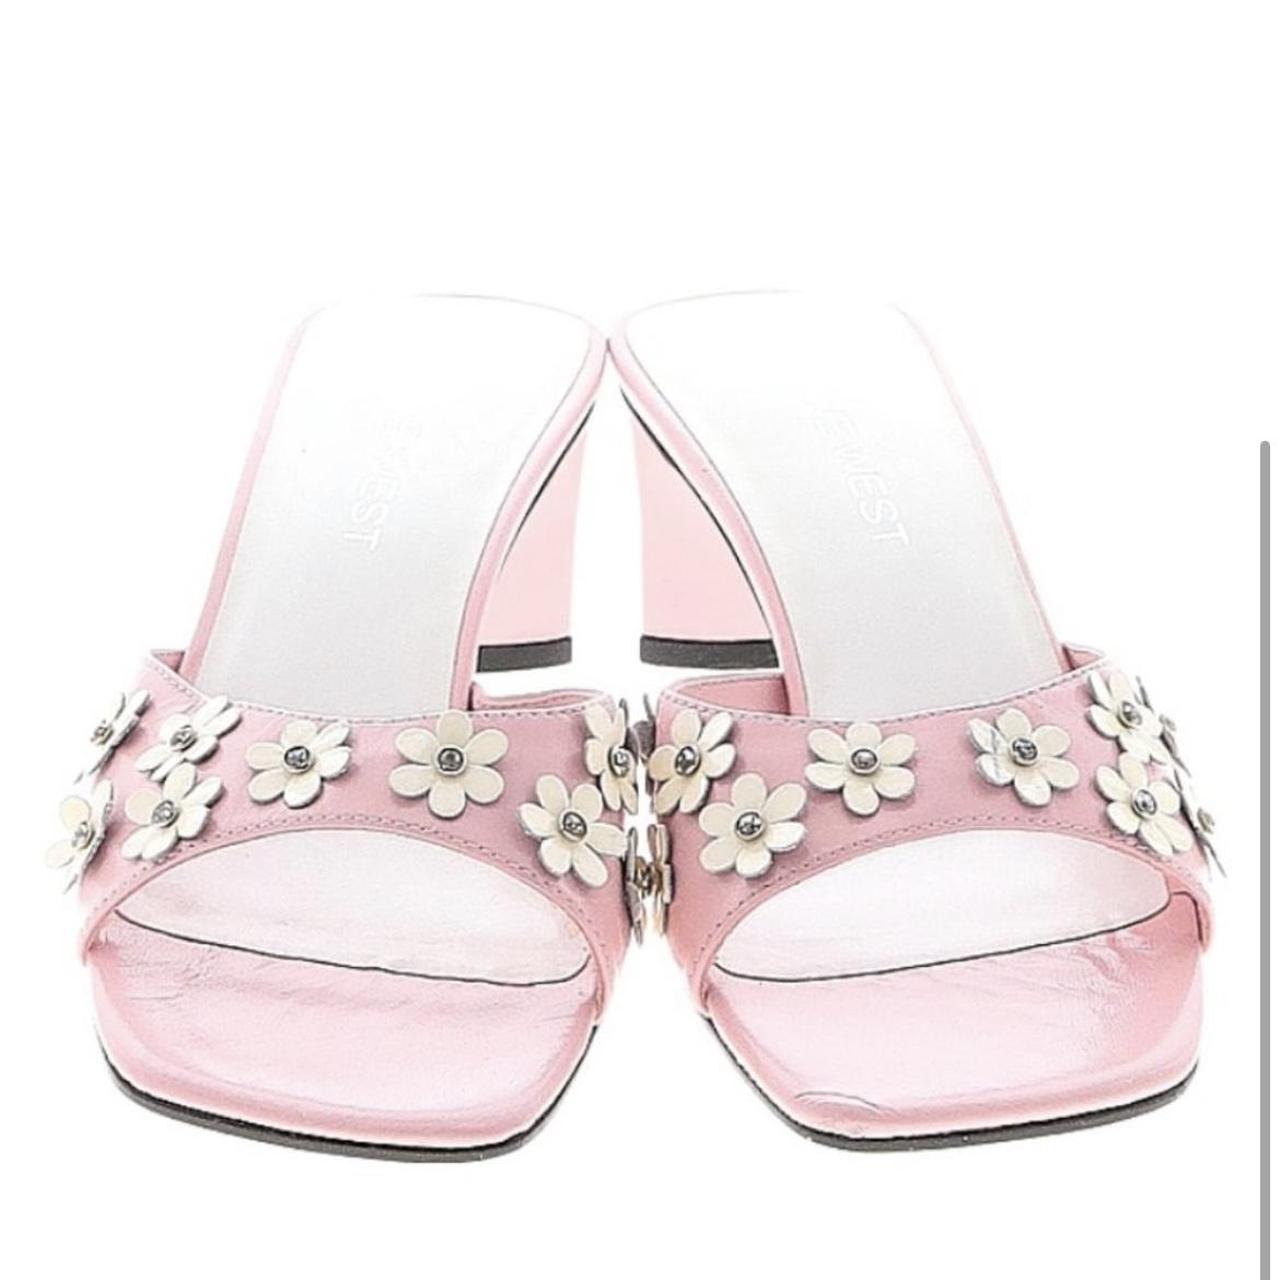 Nine West Women's White and Pink Sandals | Depop